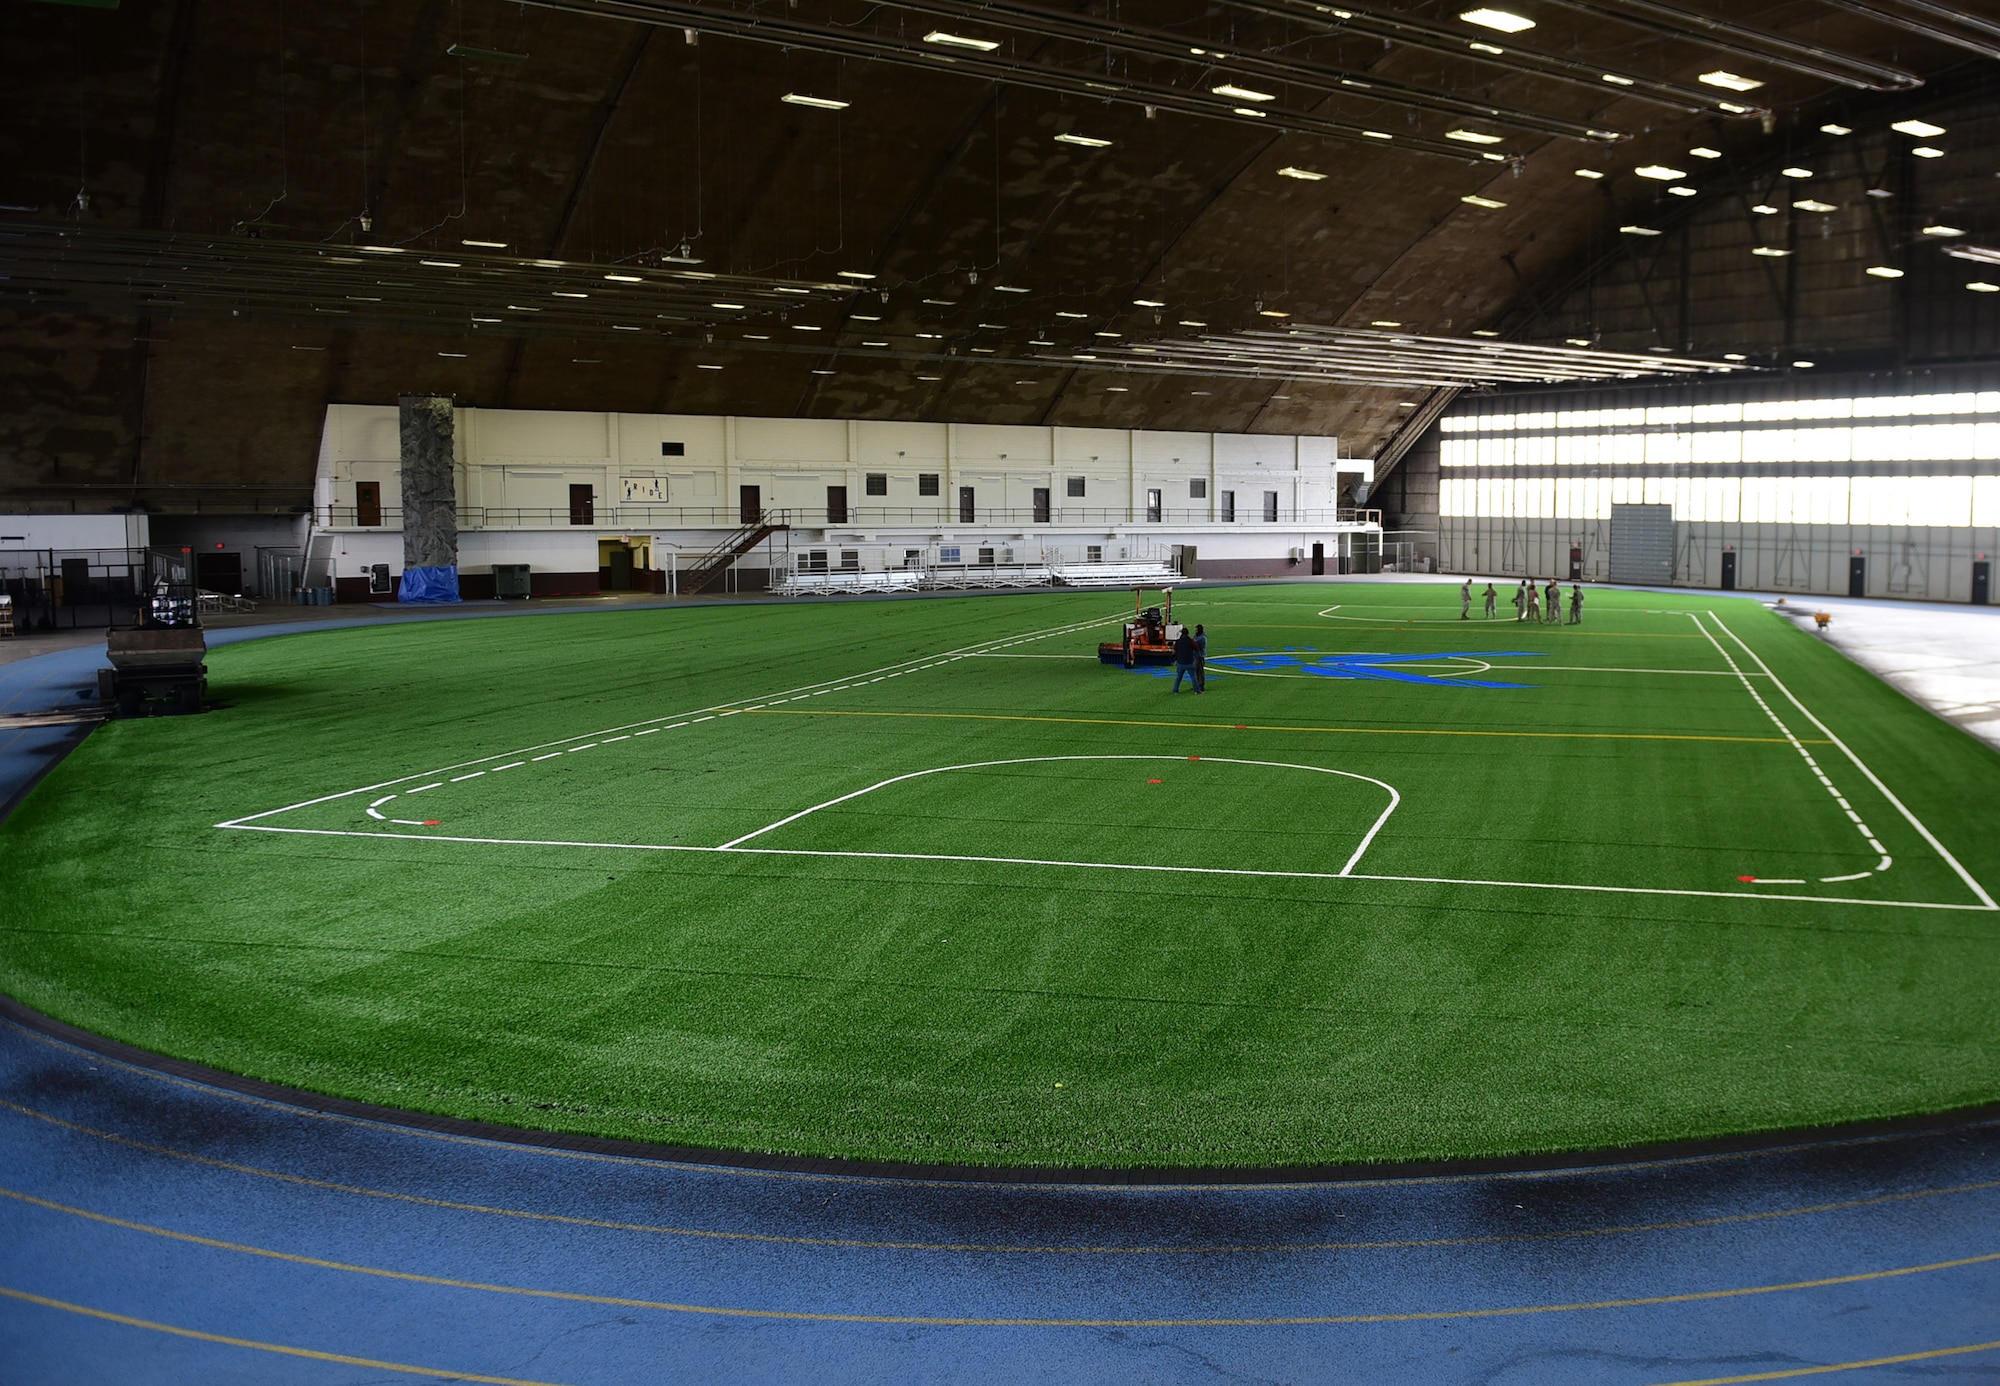 The Pride Hangar receives the final touches of its renovation at Ellsworth Air Force Base S.D., Nov. 21, 2016. The $249,000 project consisted of installation of a new Field Turf XT-65 sports field, increasing the area of the turf by 7,000 square feet, and two new batting cages. (U.S. Air Force photo by Airman 1st Class James L. Miller)